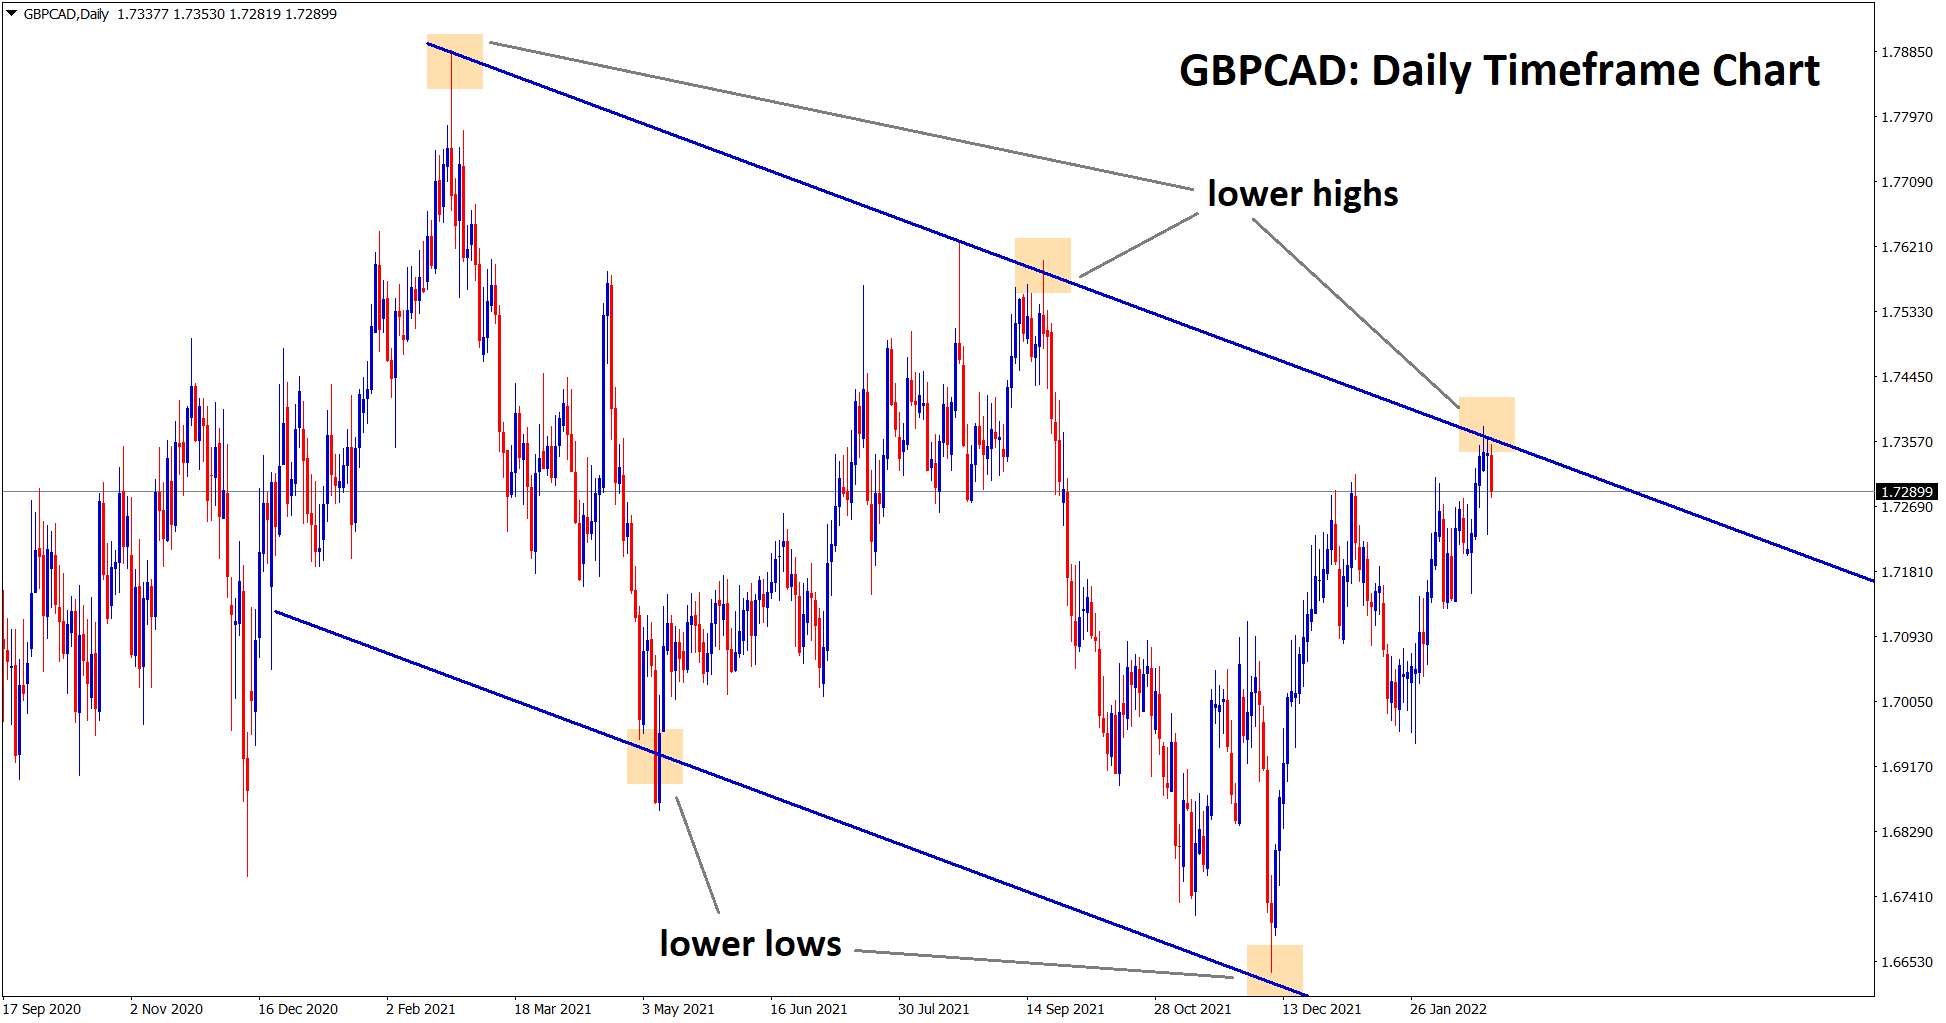 GBPCAD hits the lower high area of the descending channel line